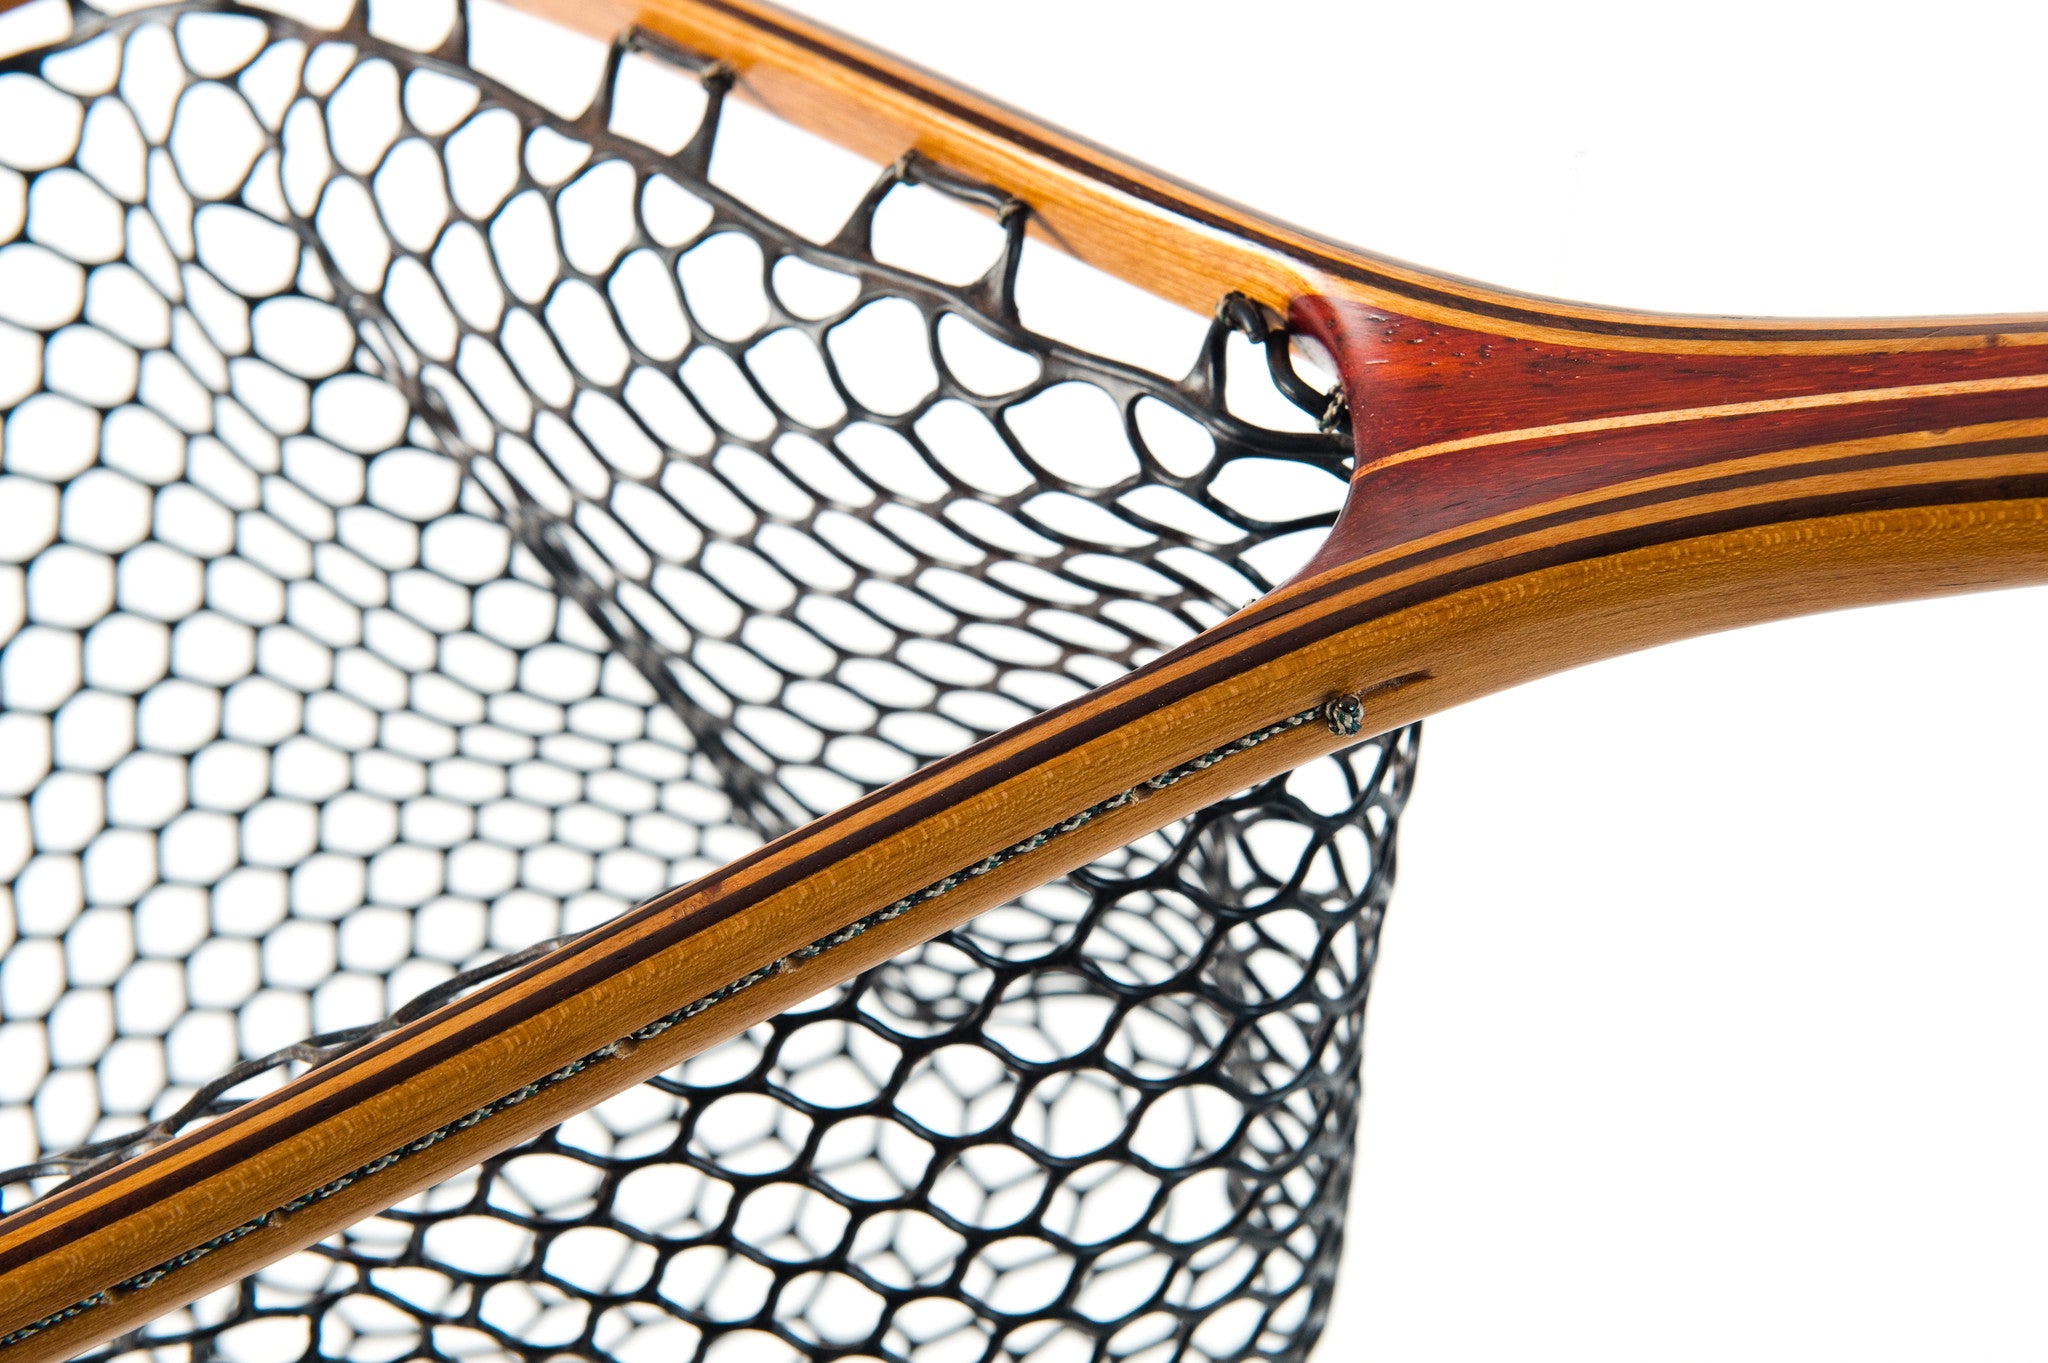 Thunder creek net. Tailwater Outdoors premium quality classic style fishing nets, handmade from high quality woods. Ideal for all fishing and outdoor enthusiasts.